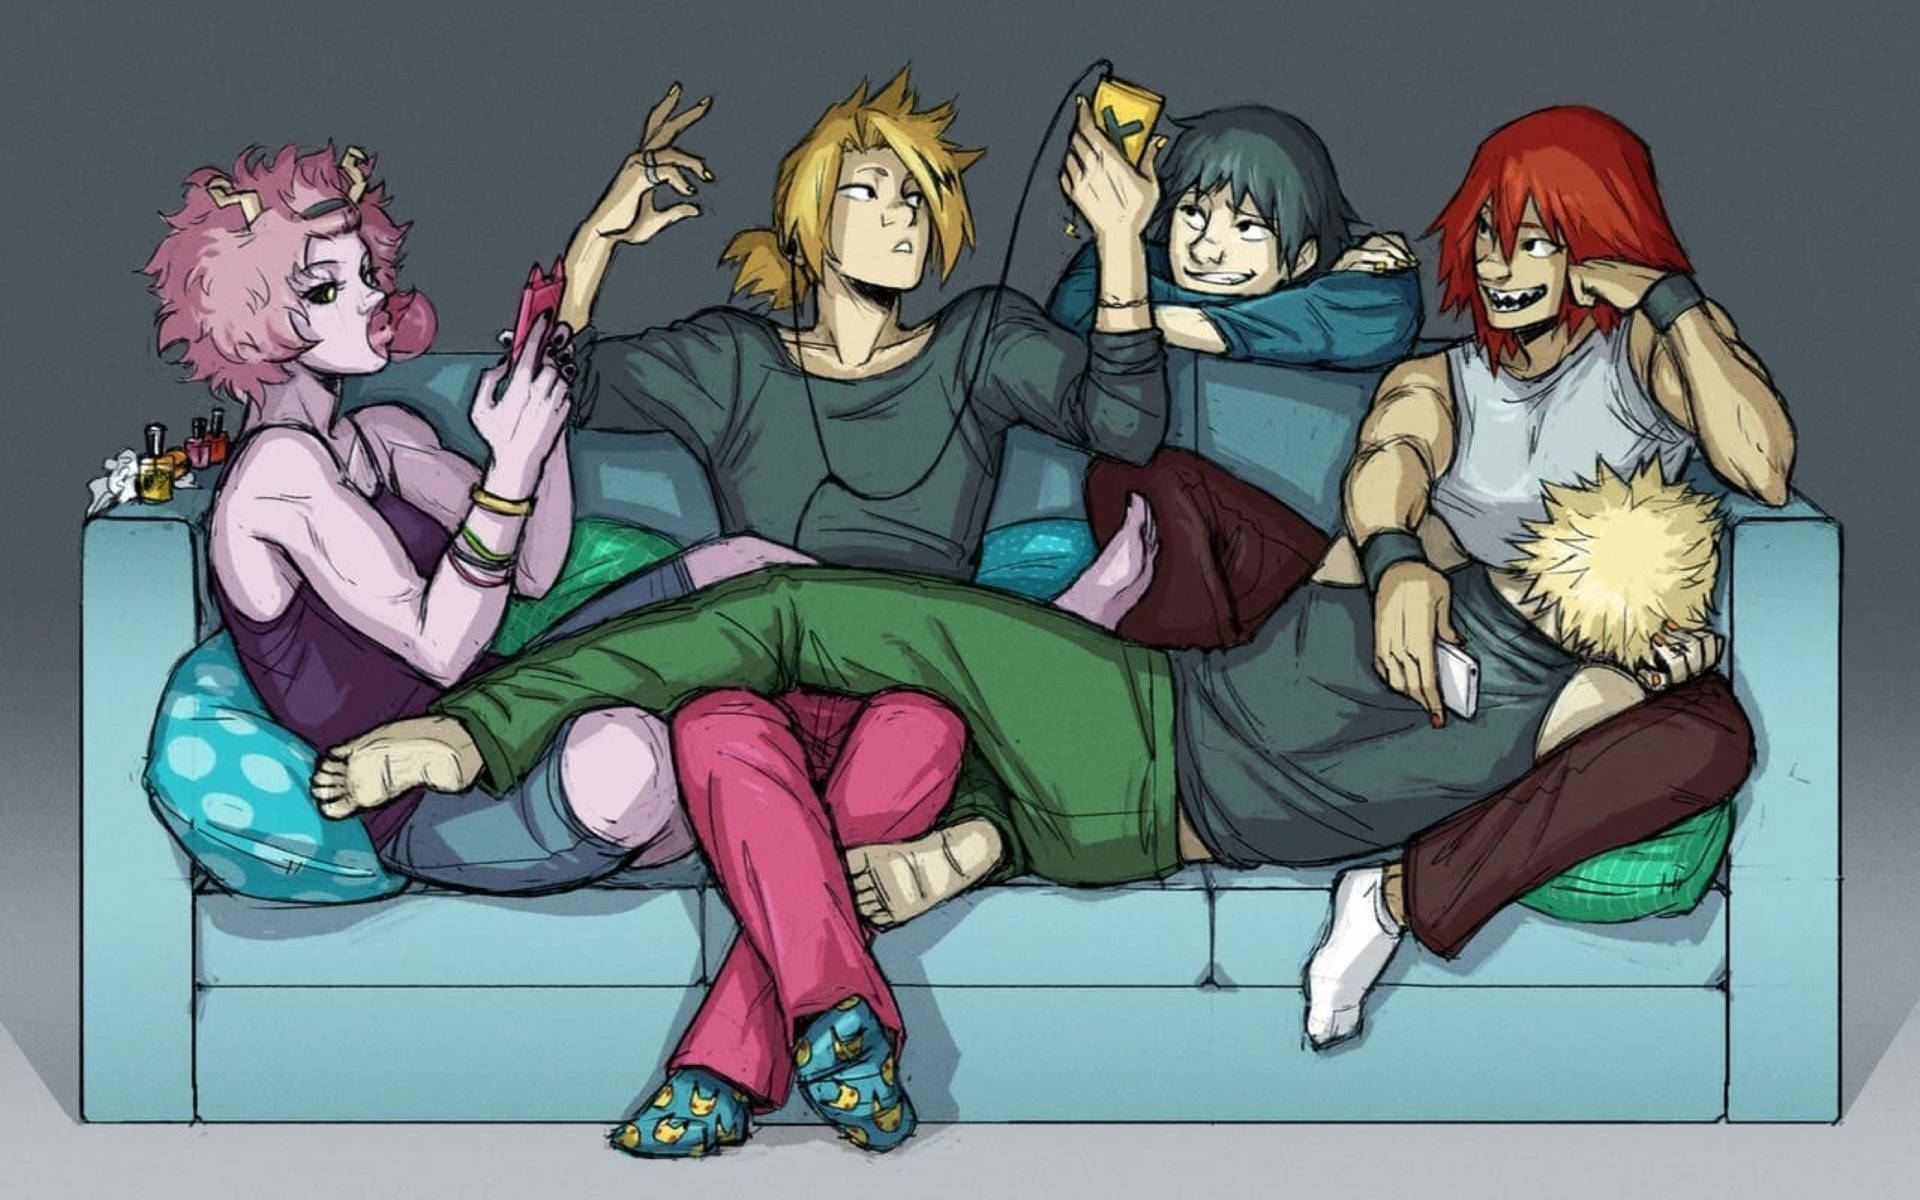 Bakusquad Chilling On Couch Wallpaper